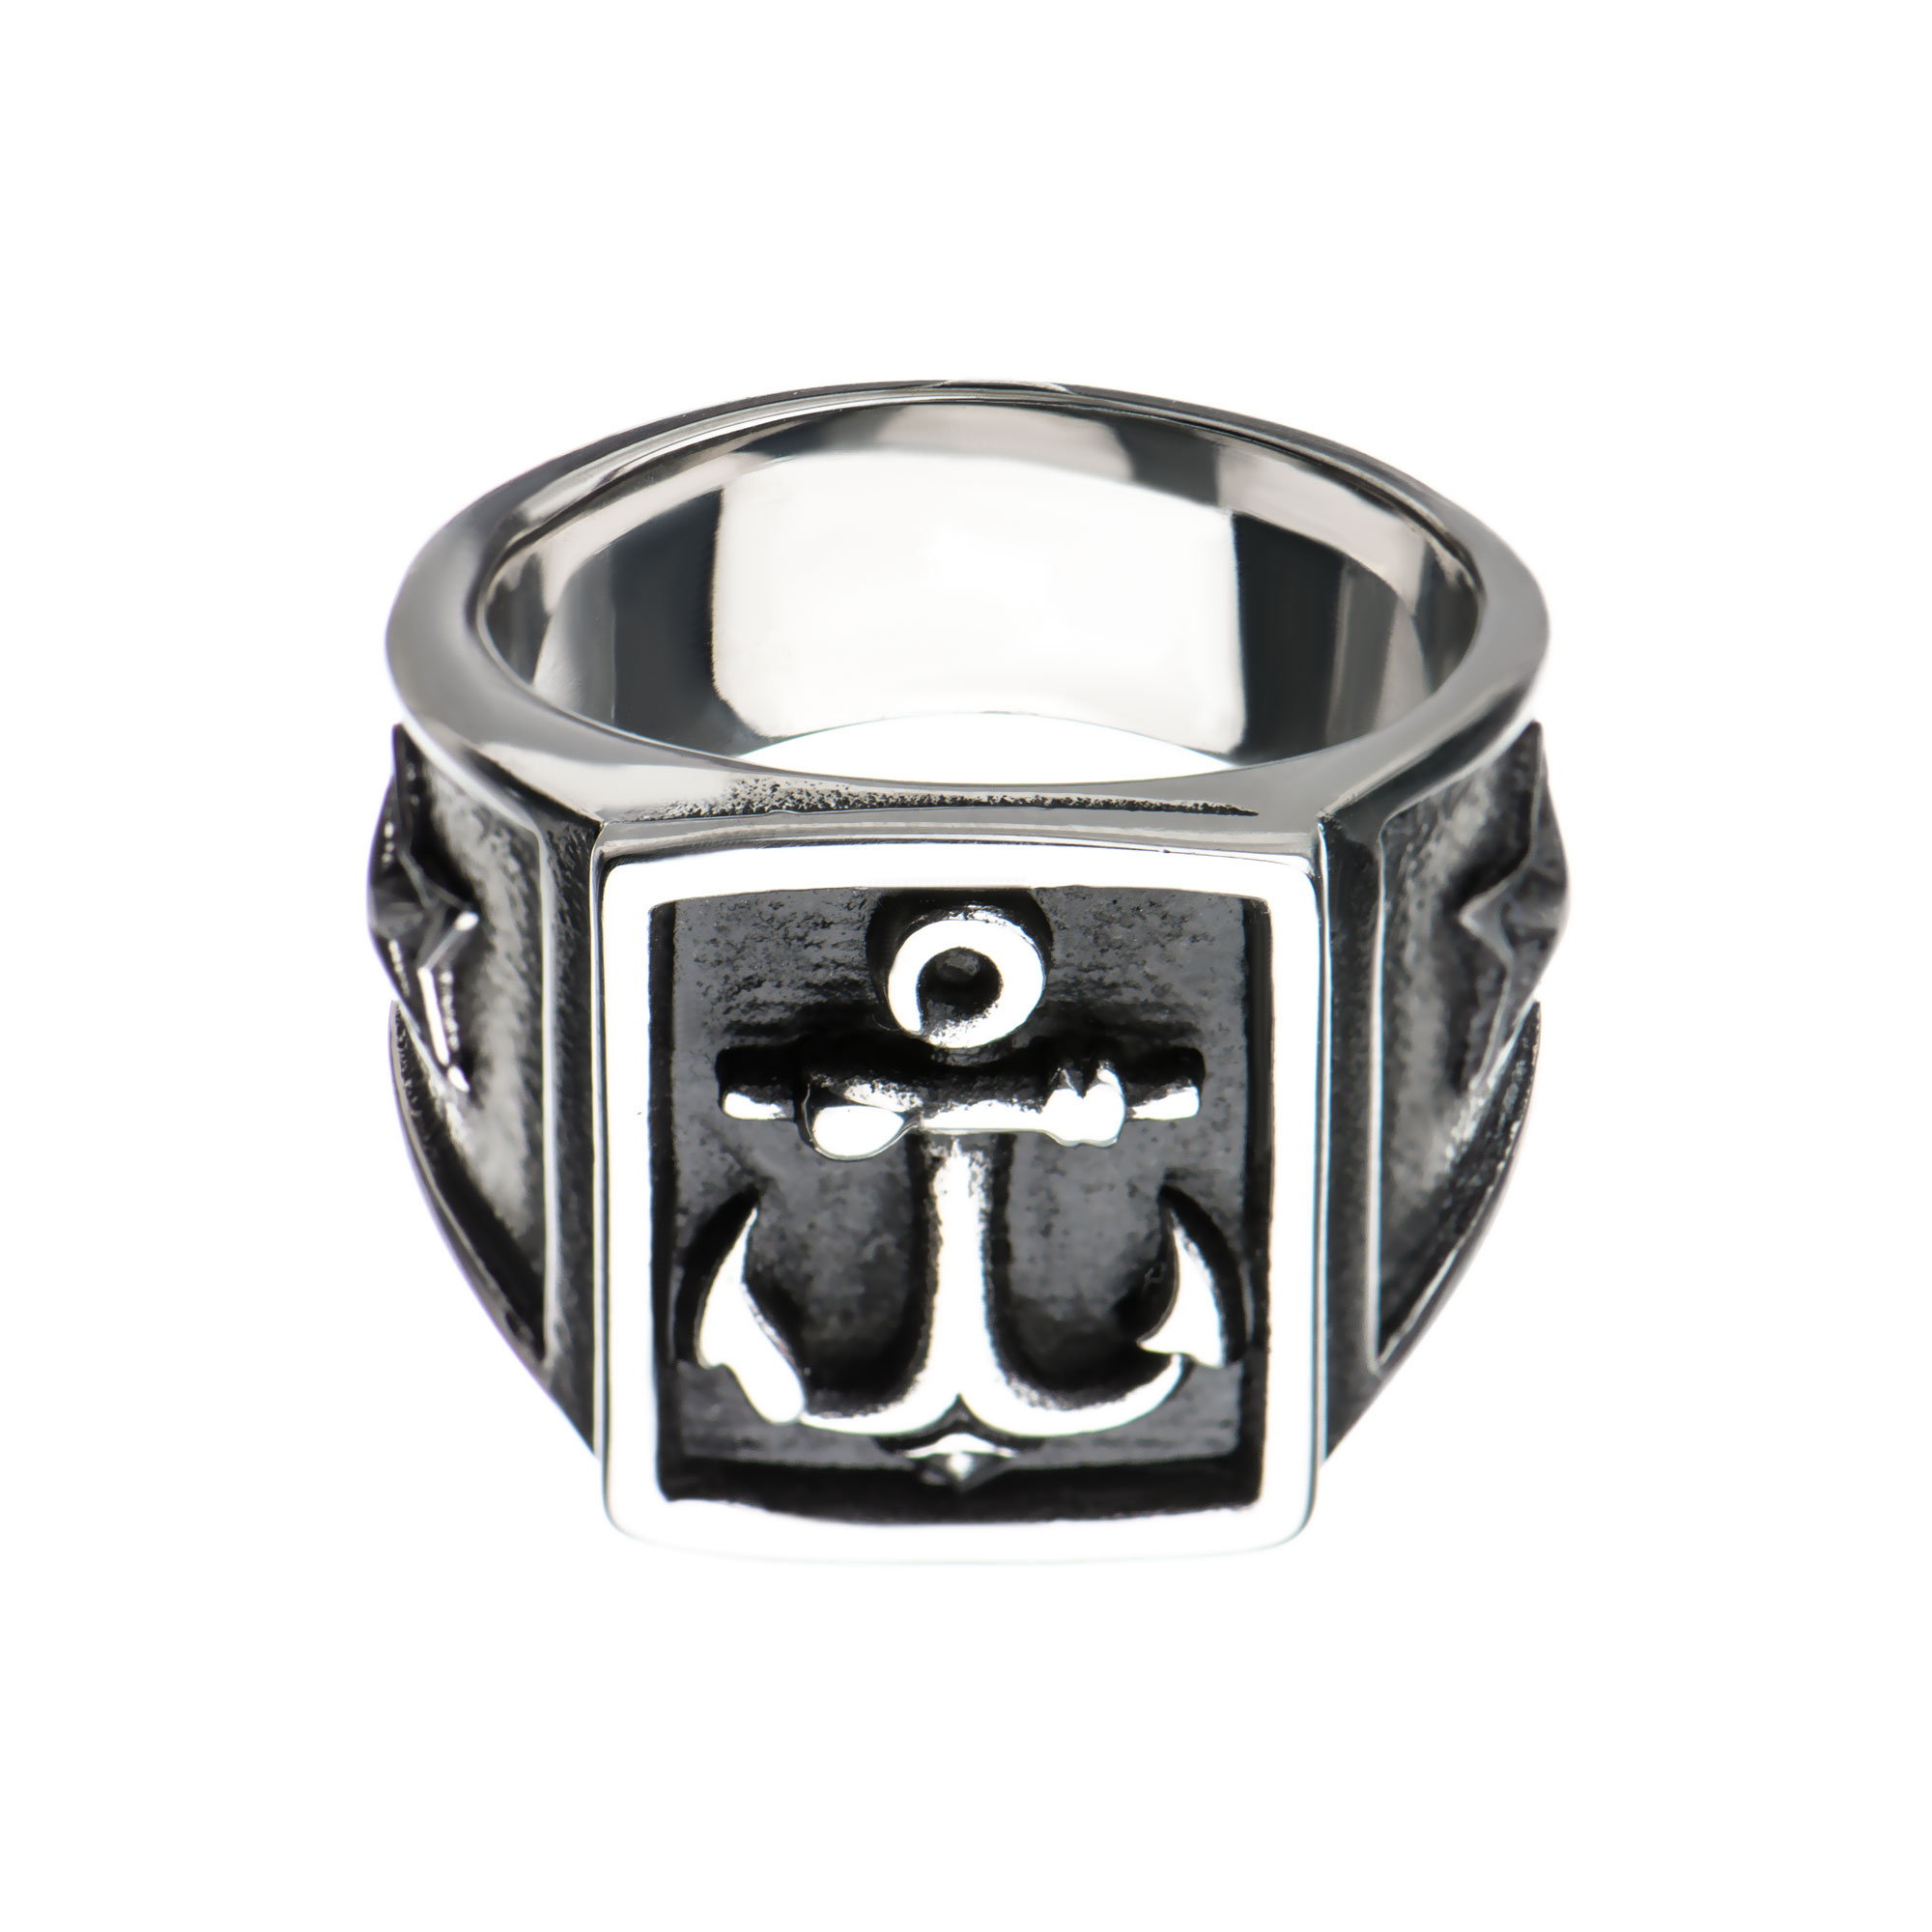 Steel & Black Plated Oxidized Anchor Signet Ring Image 2 Enchanted Jewelry Plainfield, CT